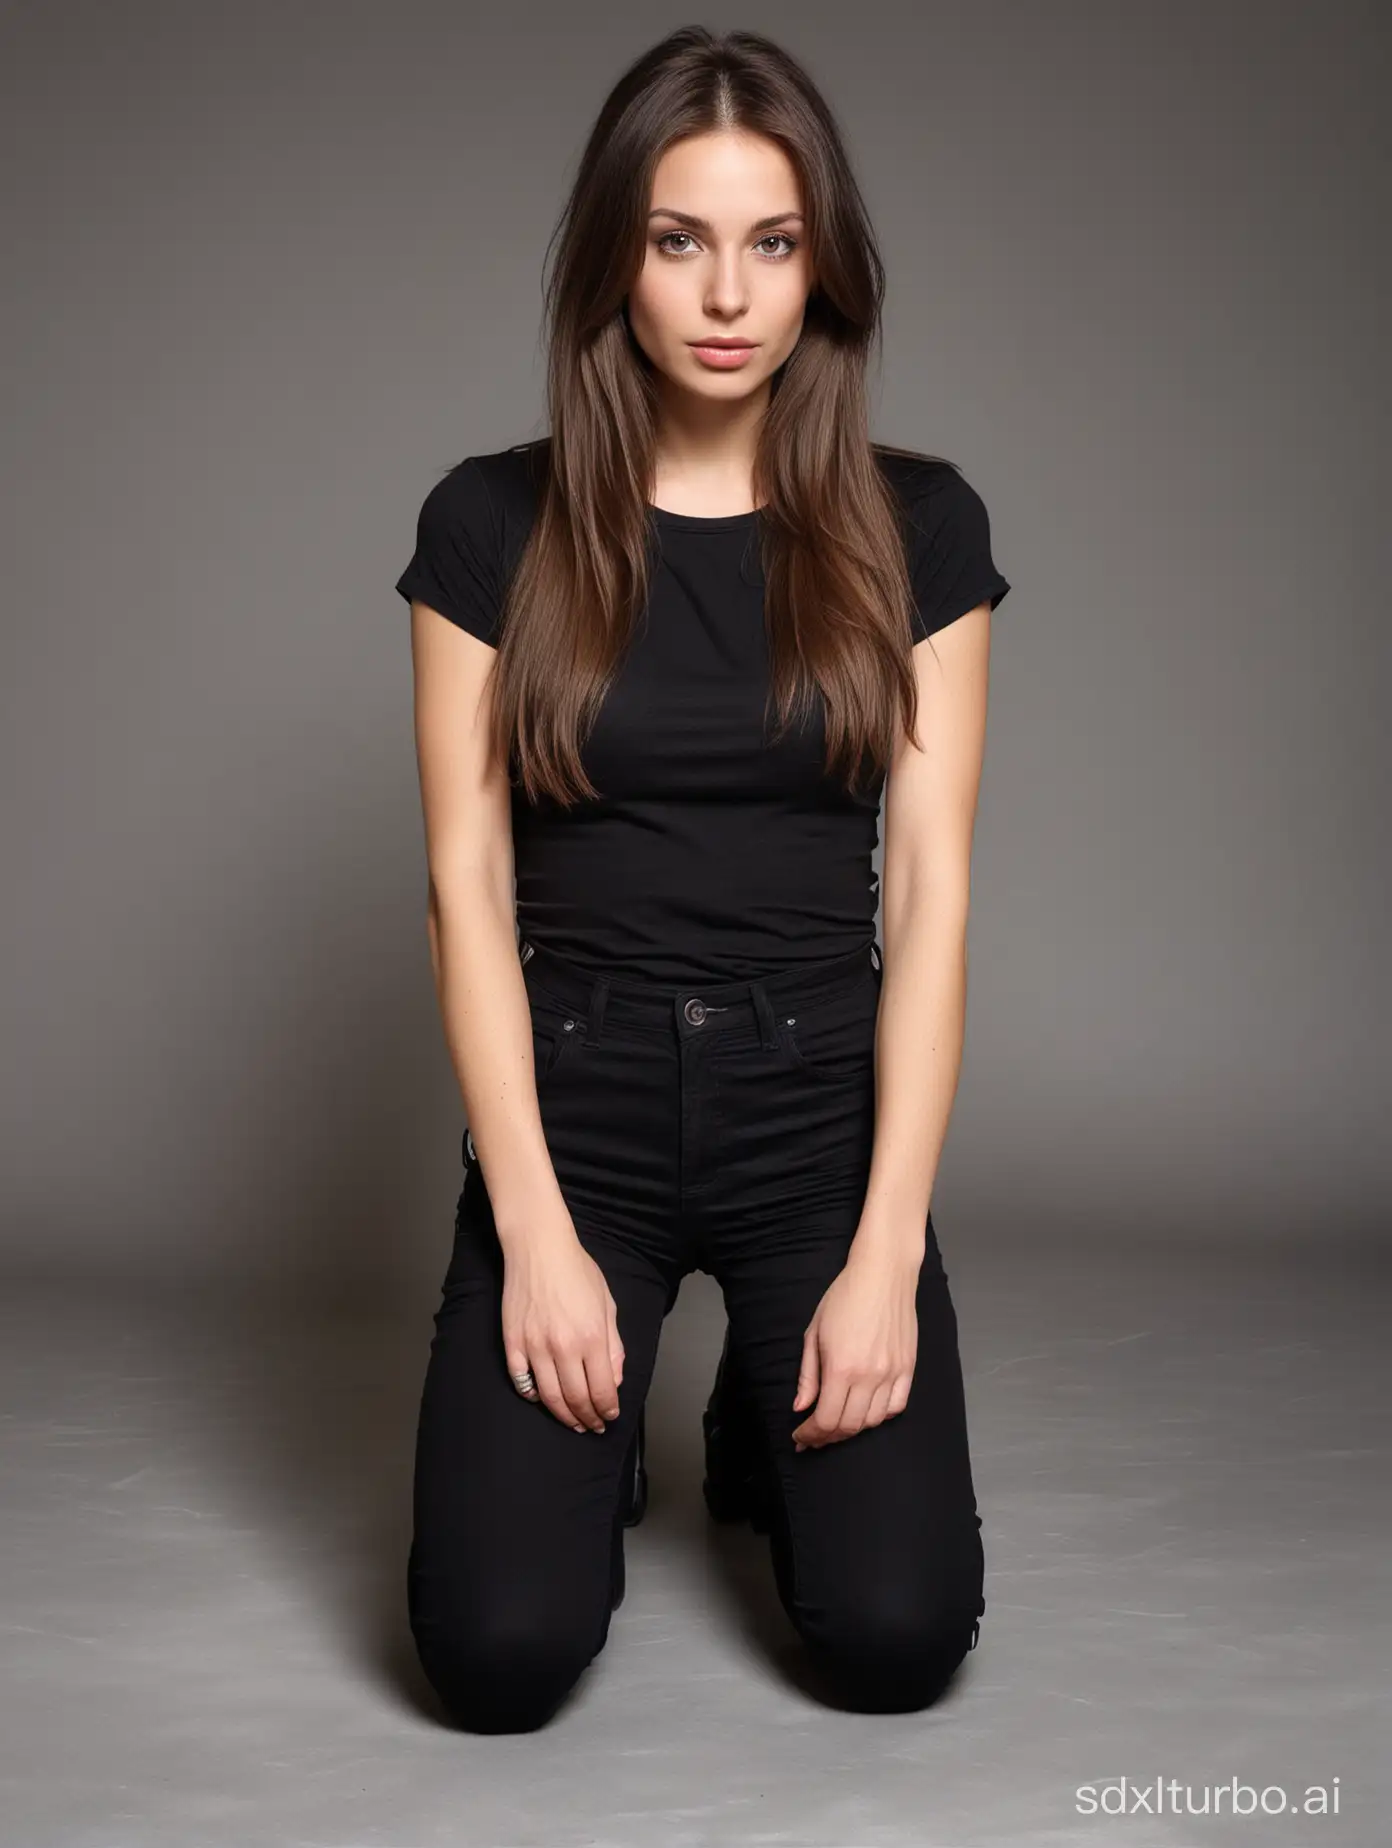 fetal position, , Super delicate photograph, tall brunette polish girl,she has a long face, square jaw and dimples, full body, (work black pants without pockets), the pants have a slight silky texture, (plain black t-shirt), long straight hair, confident, elegant, slutty, safety boots,